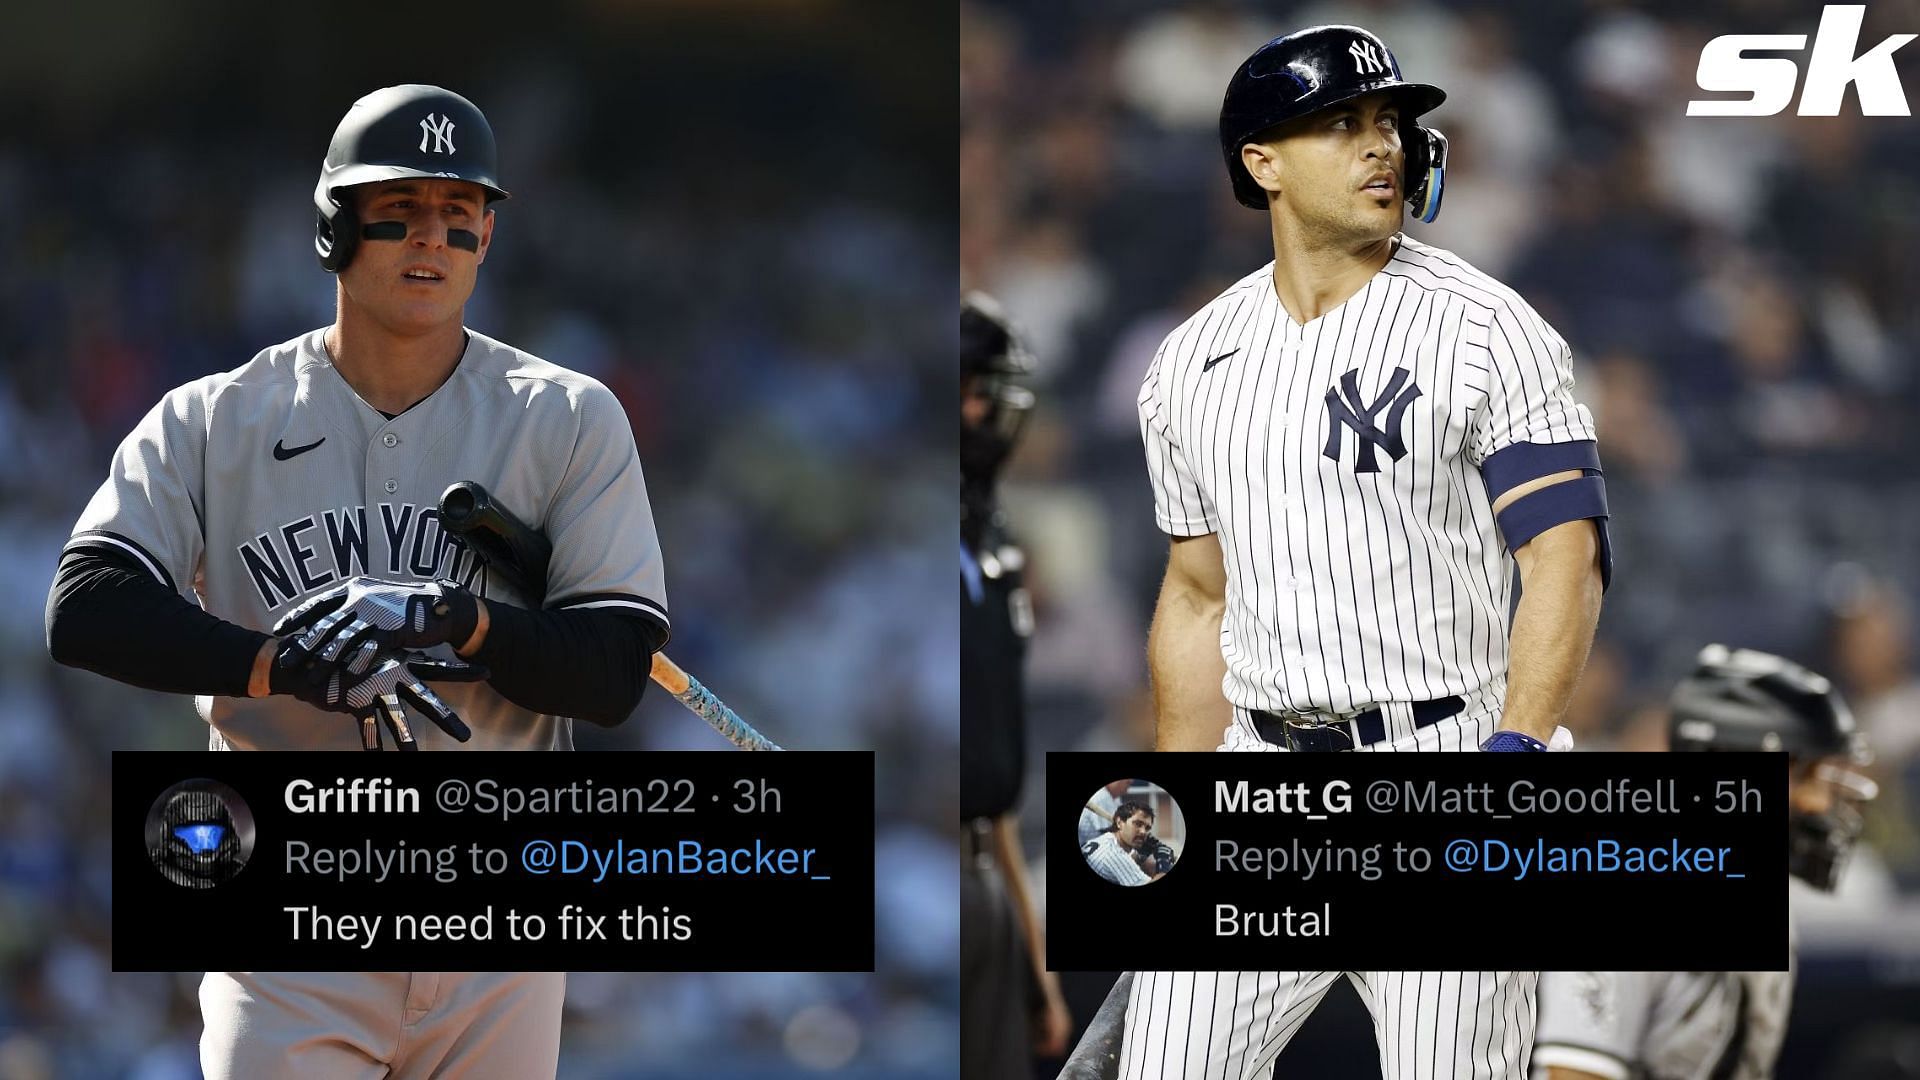 New York Yankees fans annoyed as core players have struggled